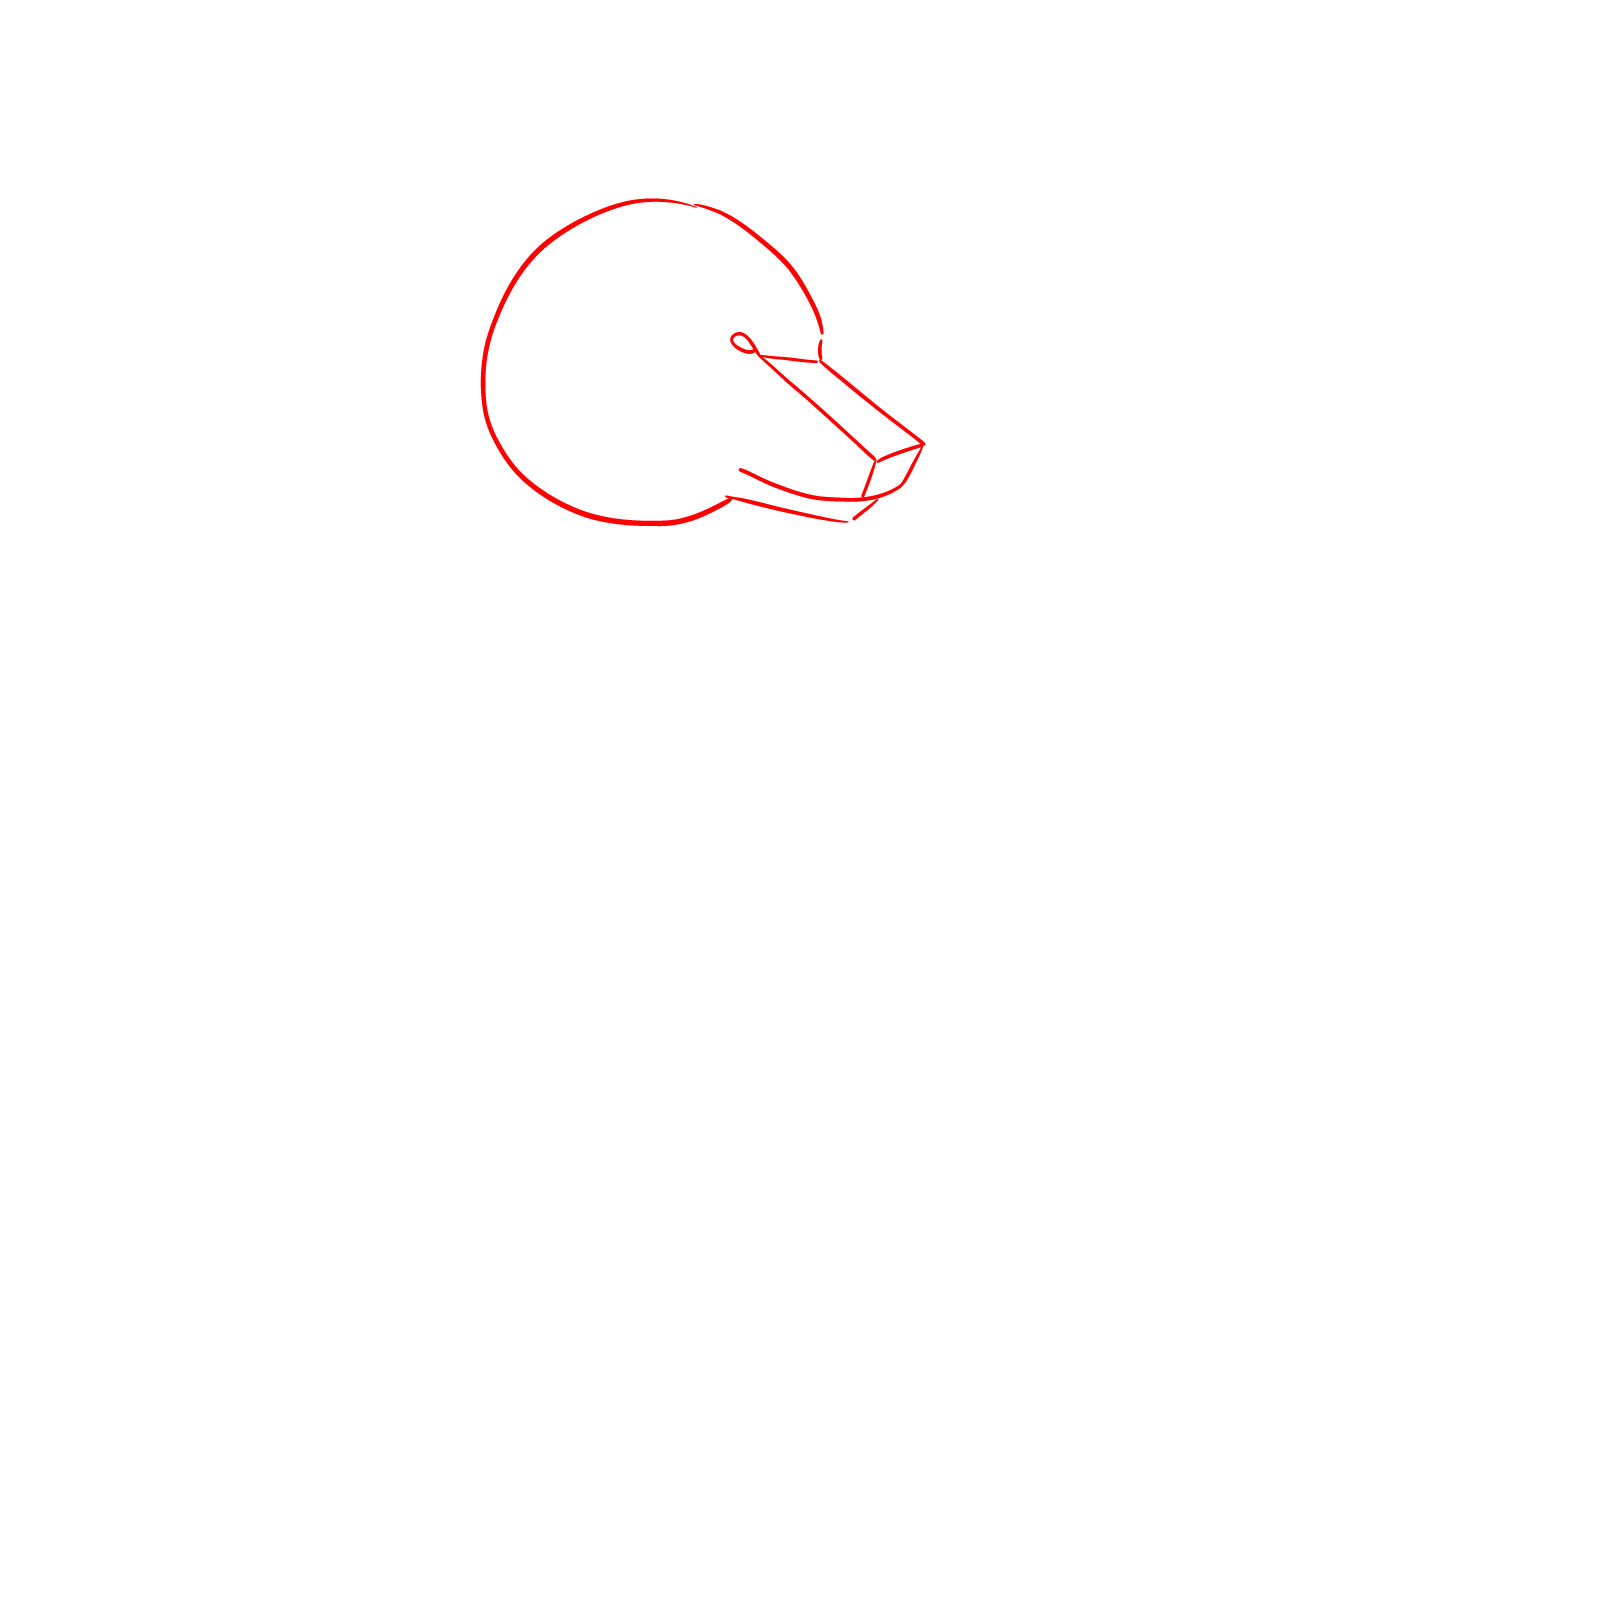 Sketch of a wolf's head for a sitting wolf side view drawing - step 01